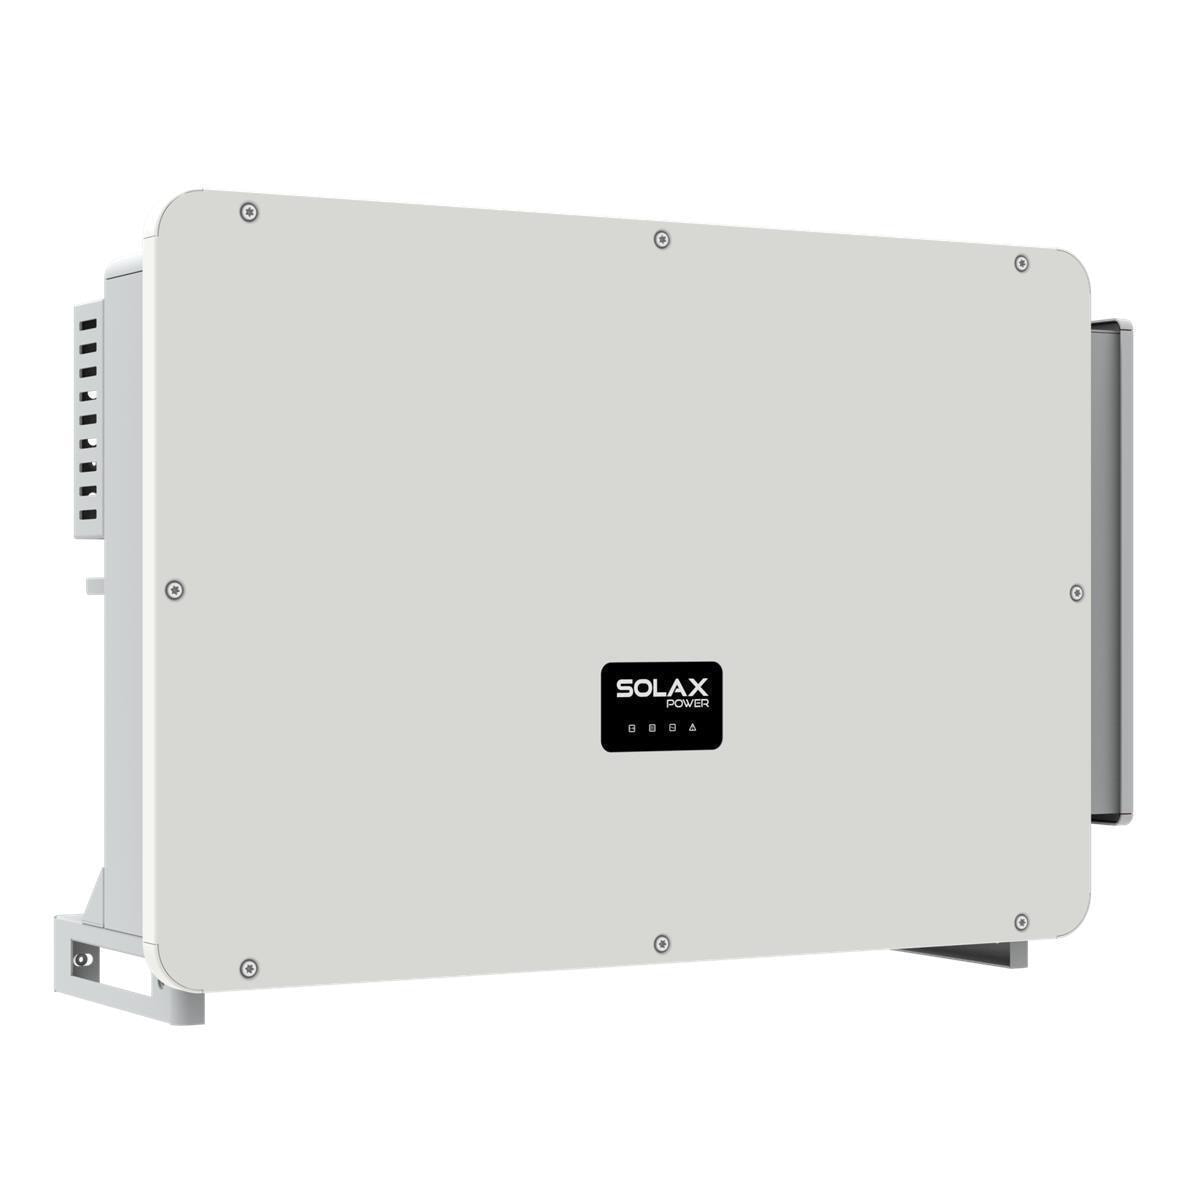 SolaX X3 Forth 136KW incl. AFCI arc detection